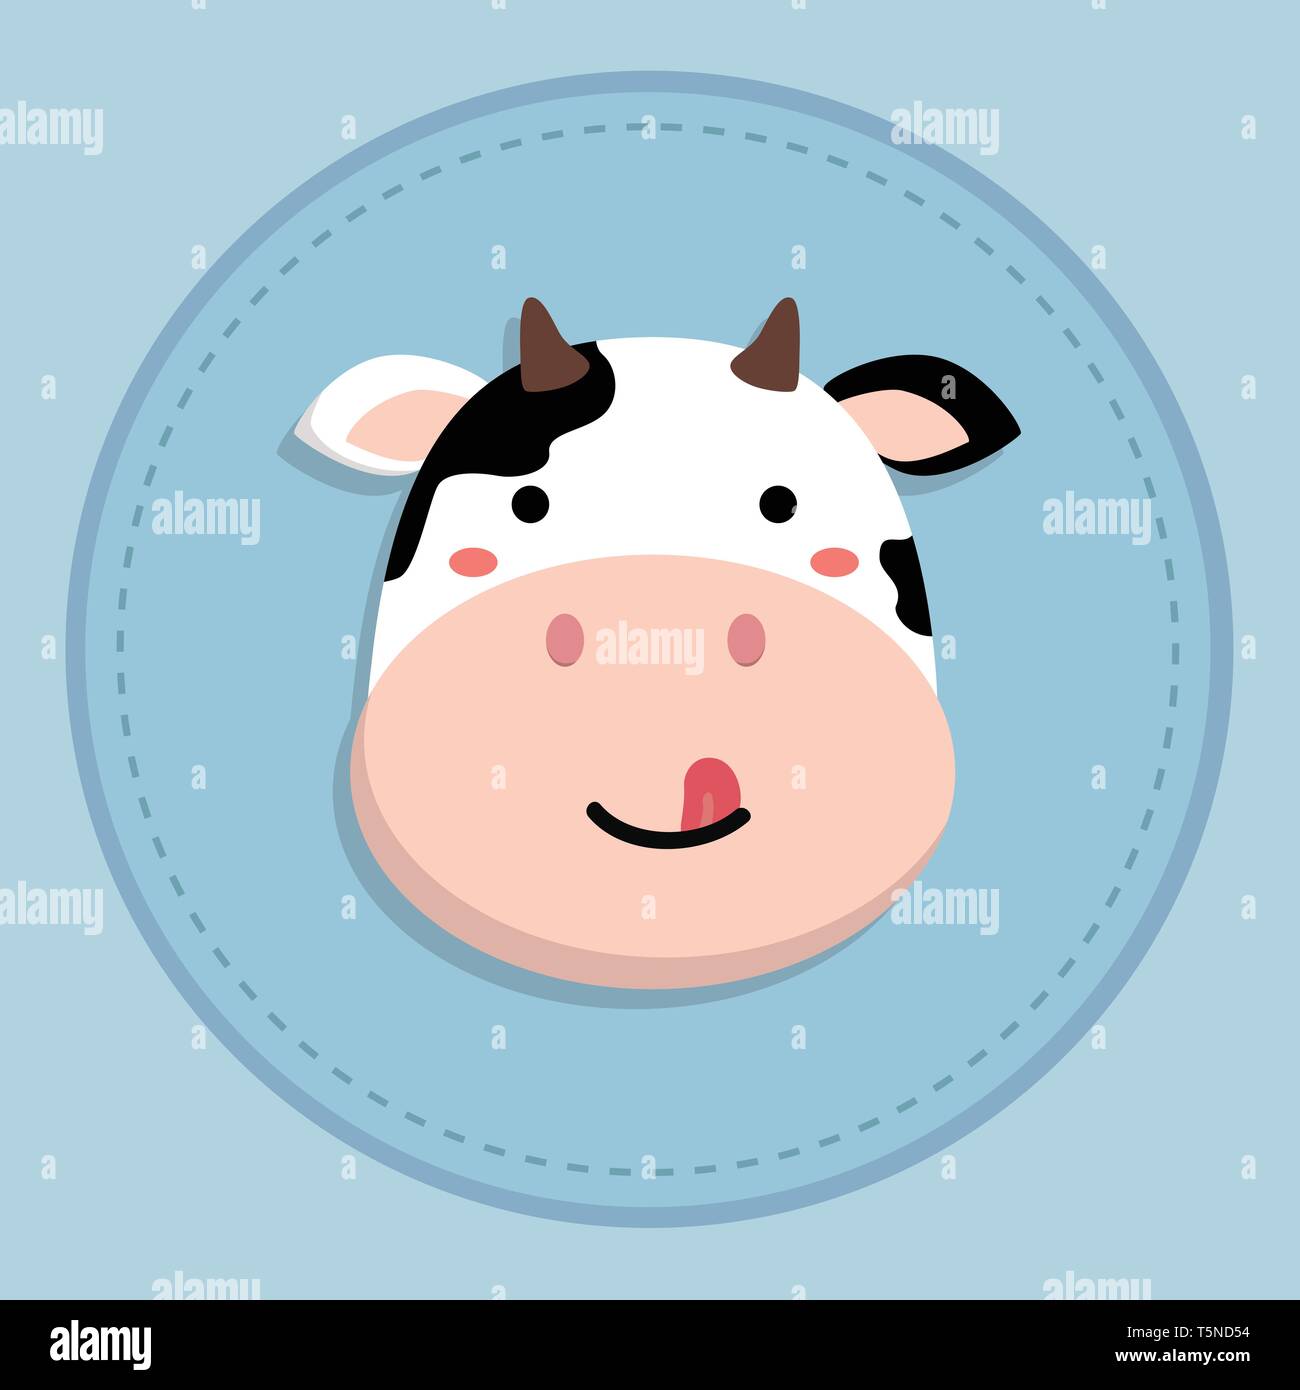 Vector illustration of a cute cow cartoon sticking tongue out on blue circle background. Stock Vector